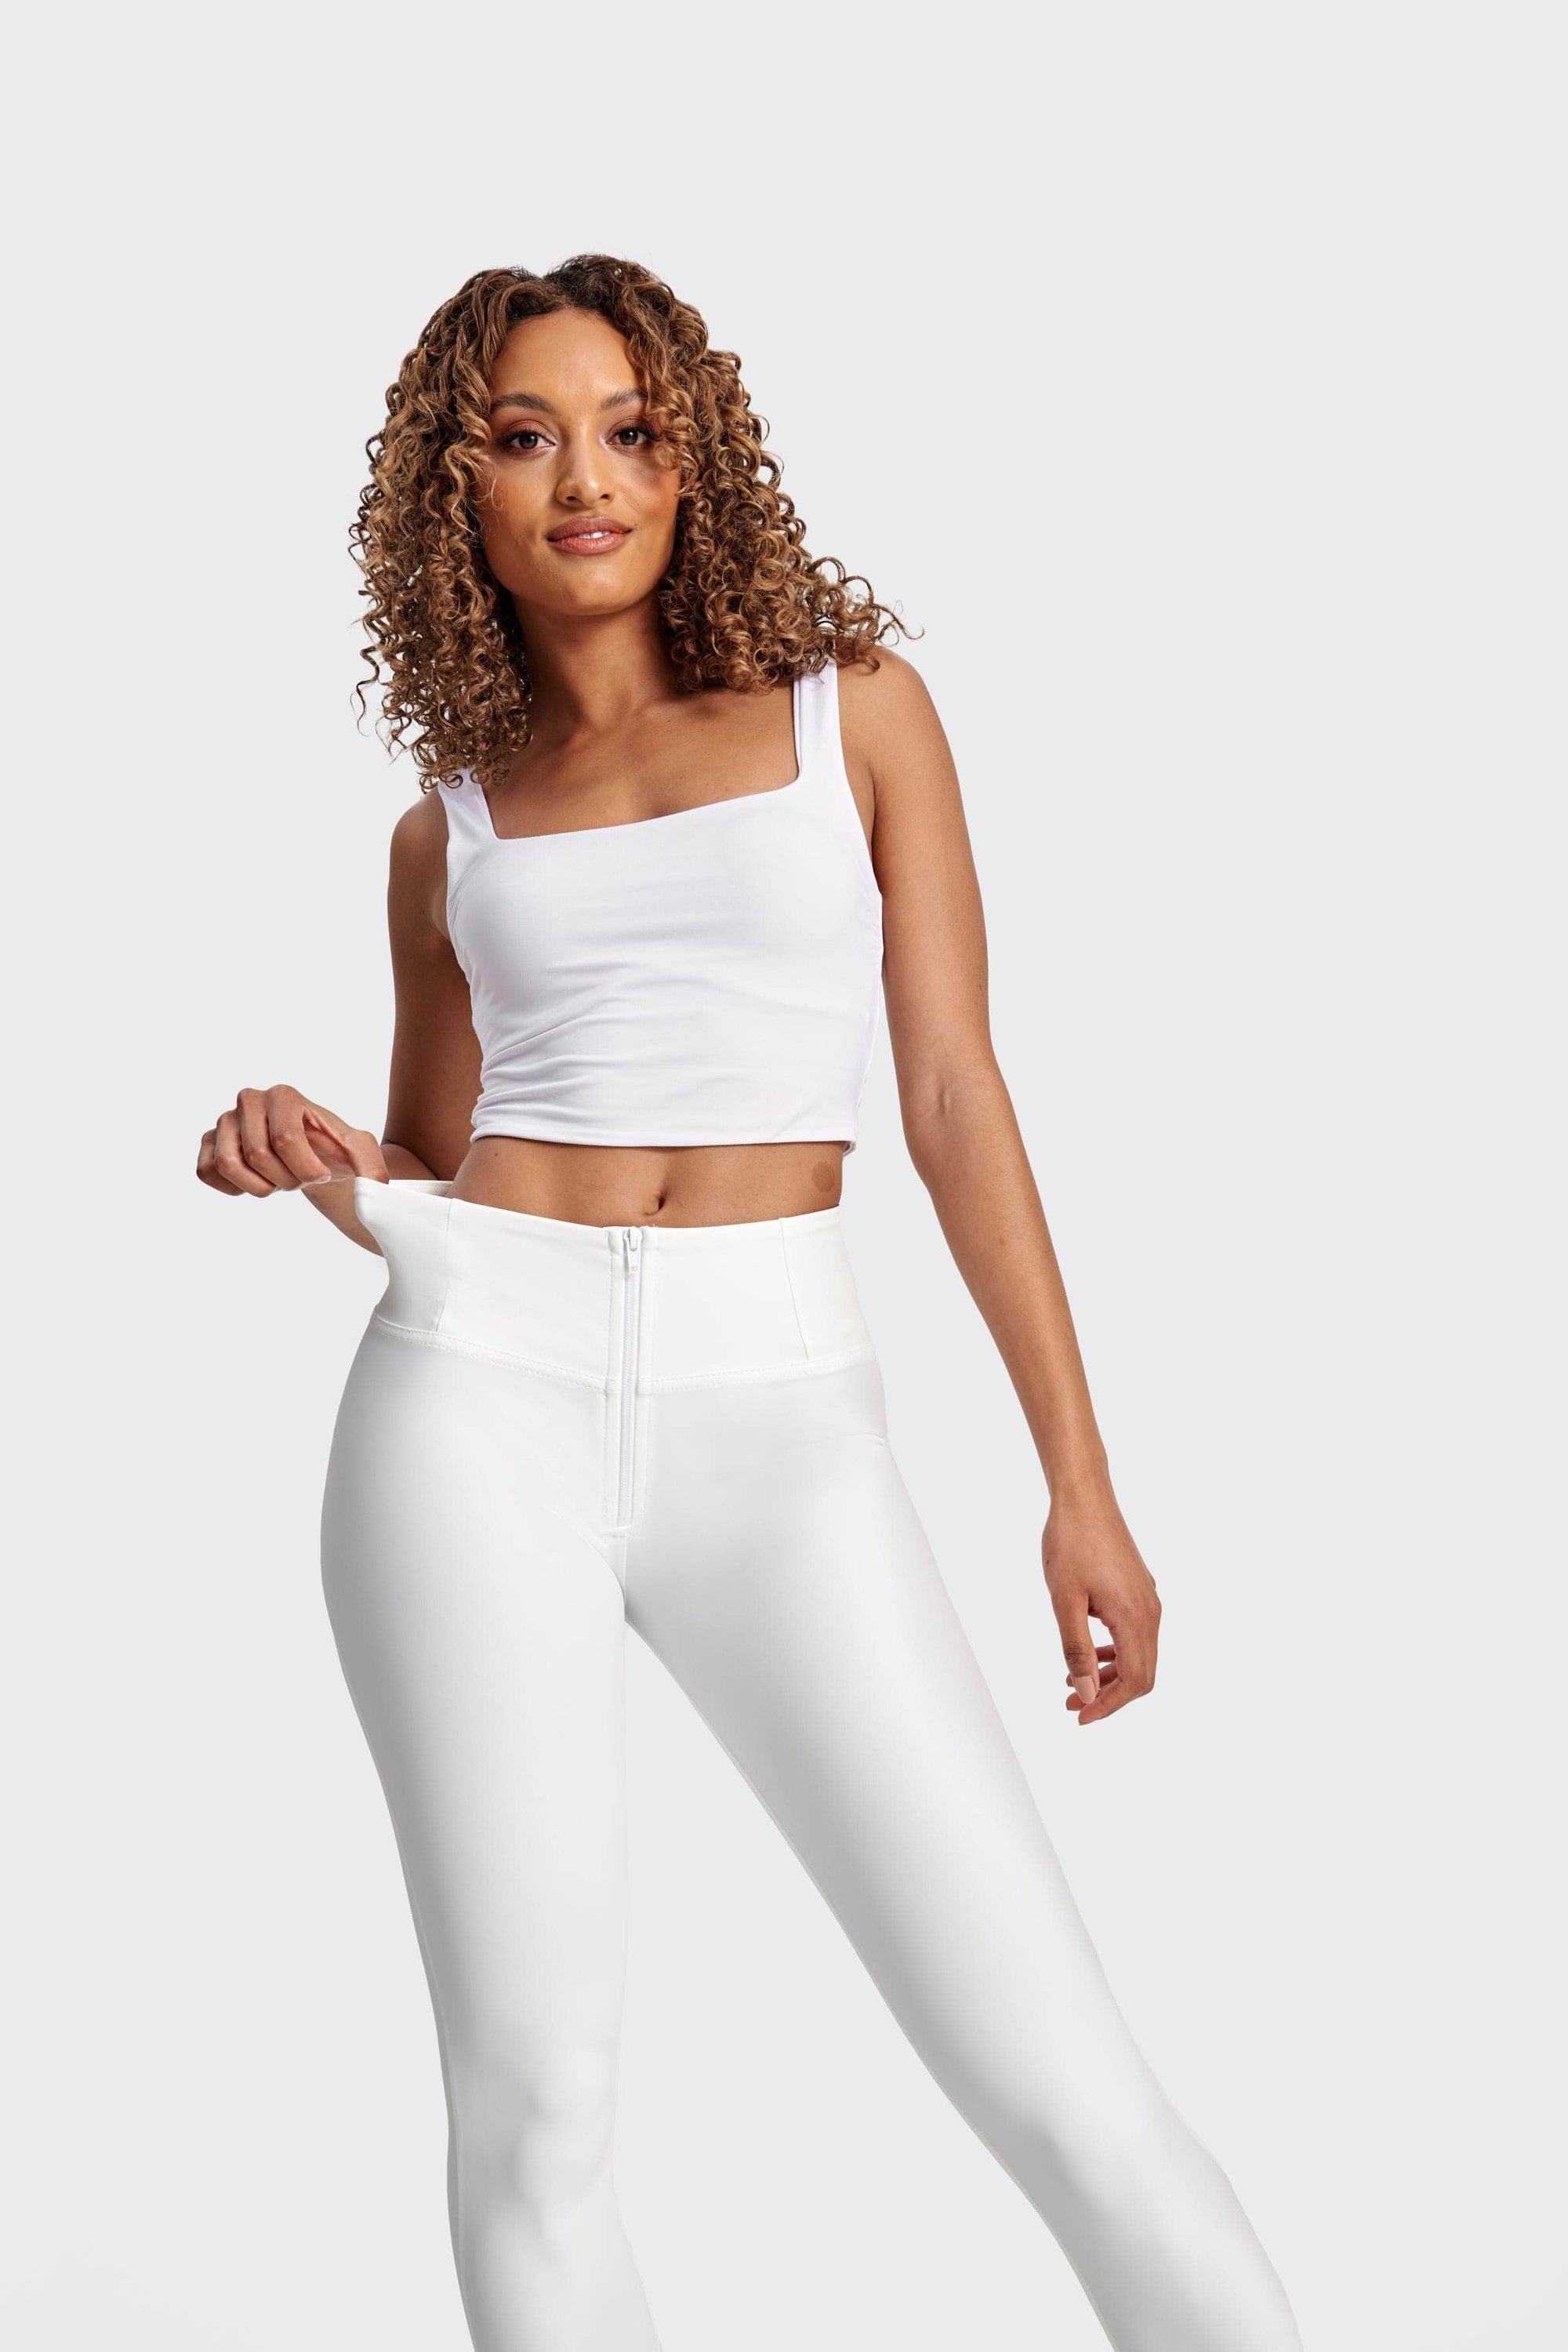 WR.UP® Faux Leather - High Waisted - Full Length - White 7